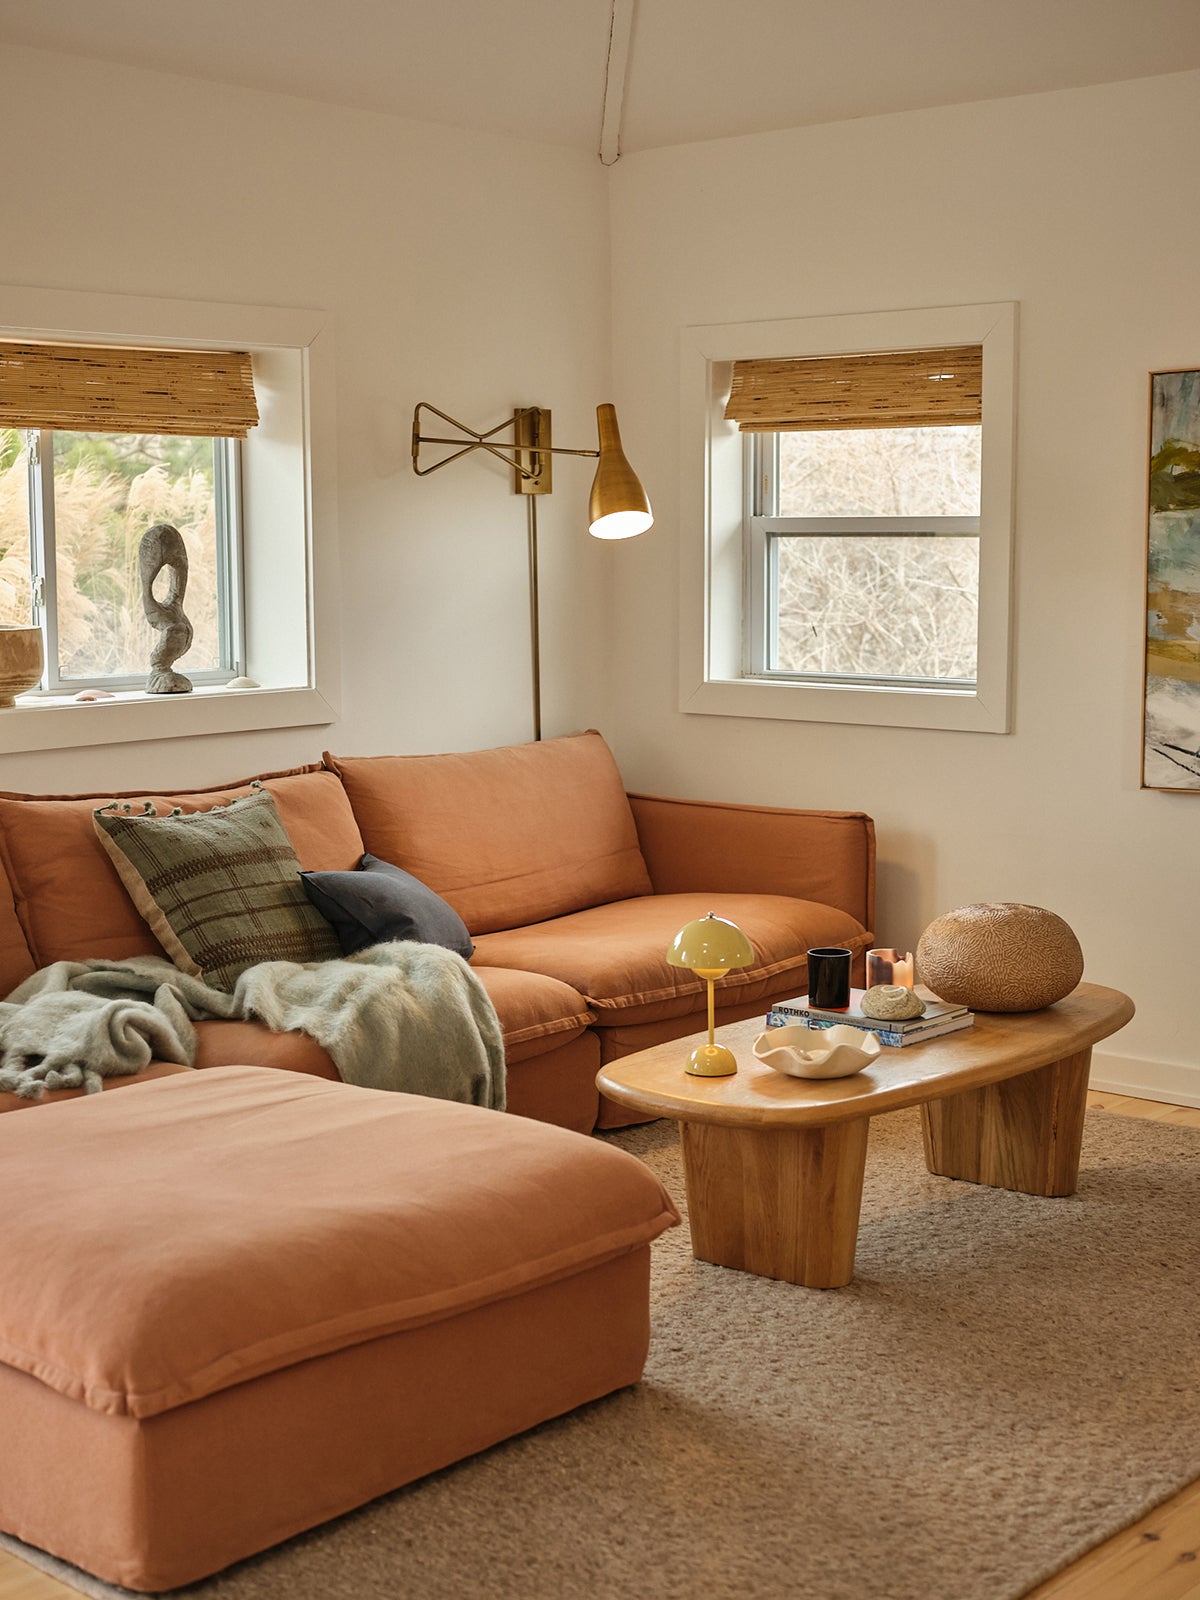 Terracotta-colored L shaped sofa in a small living room